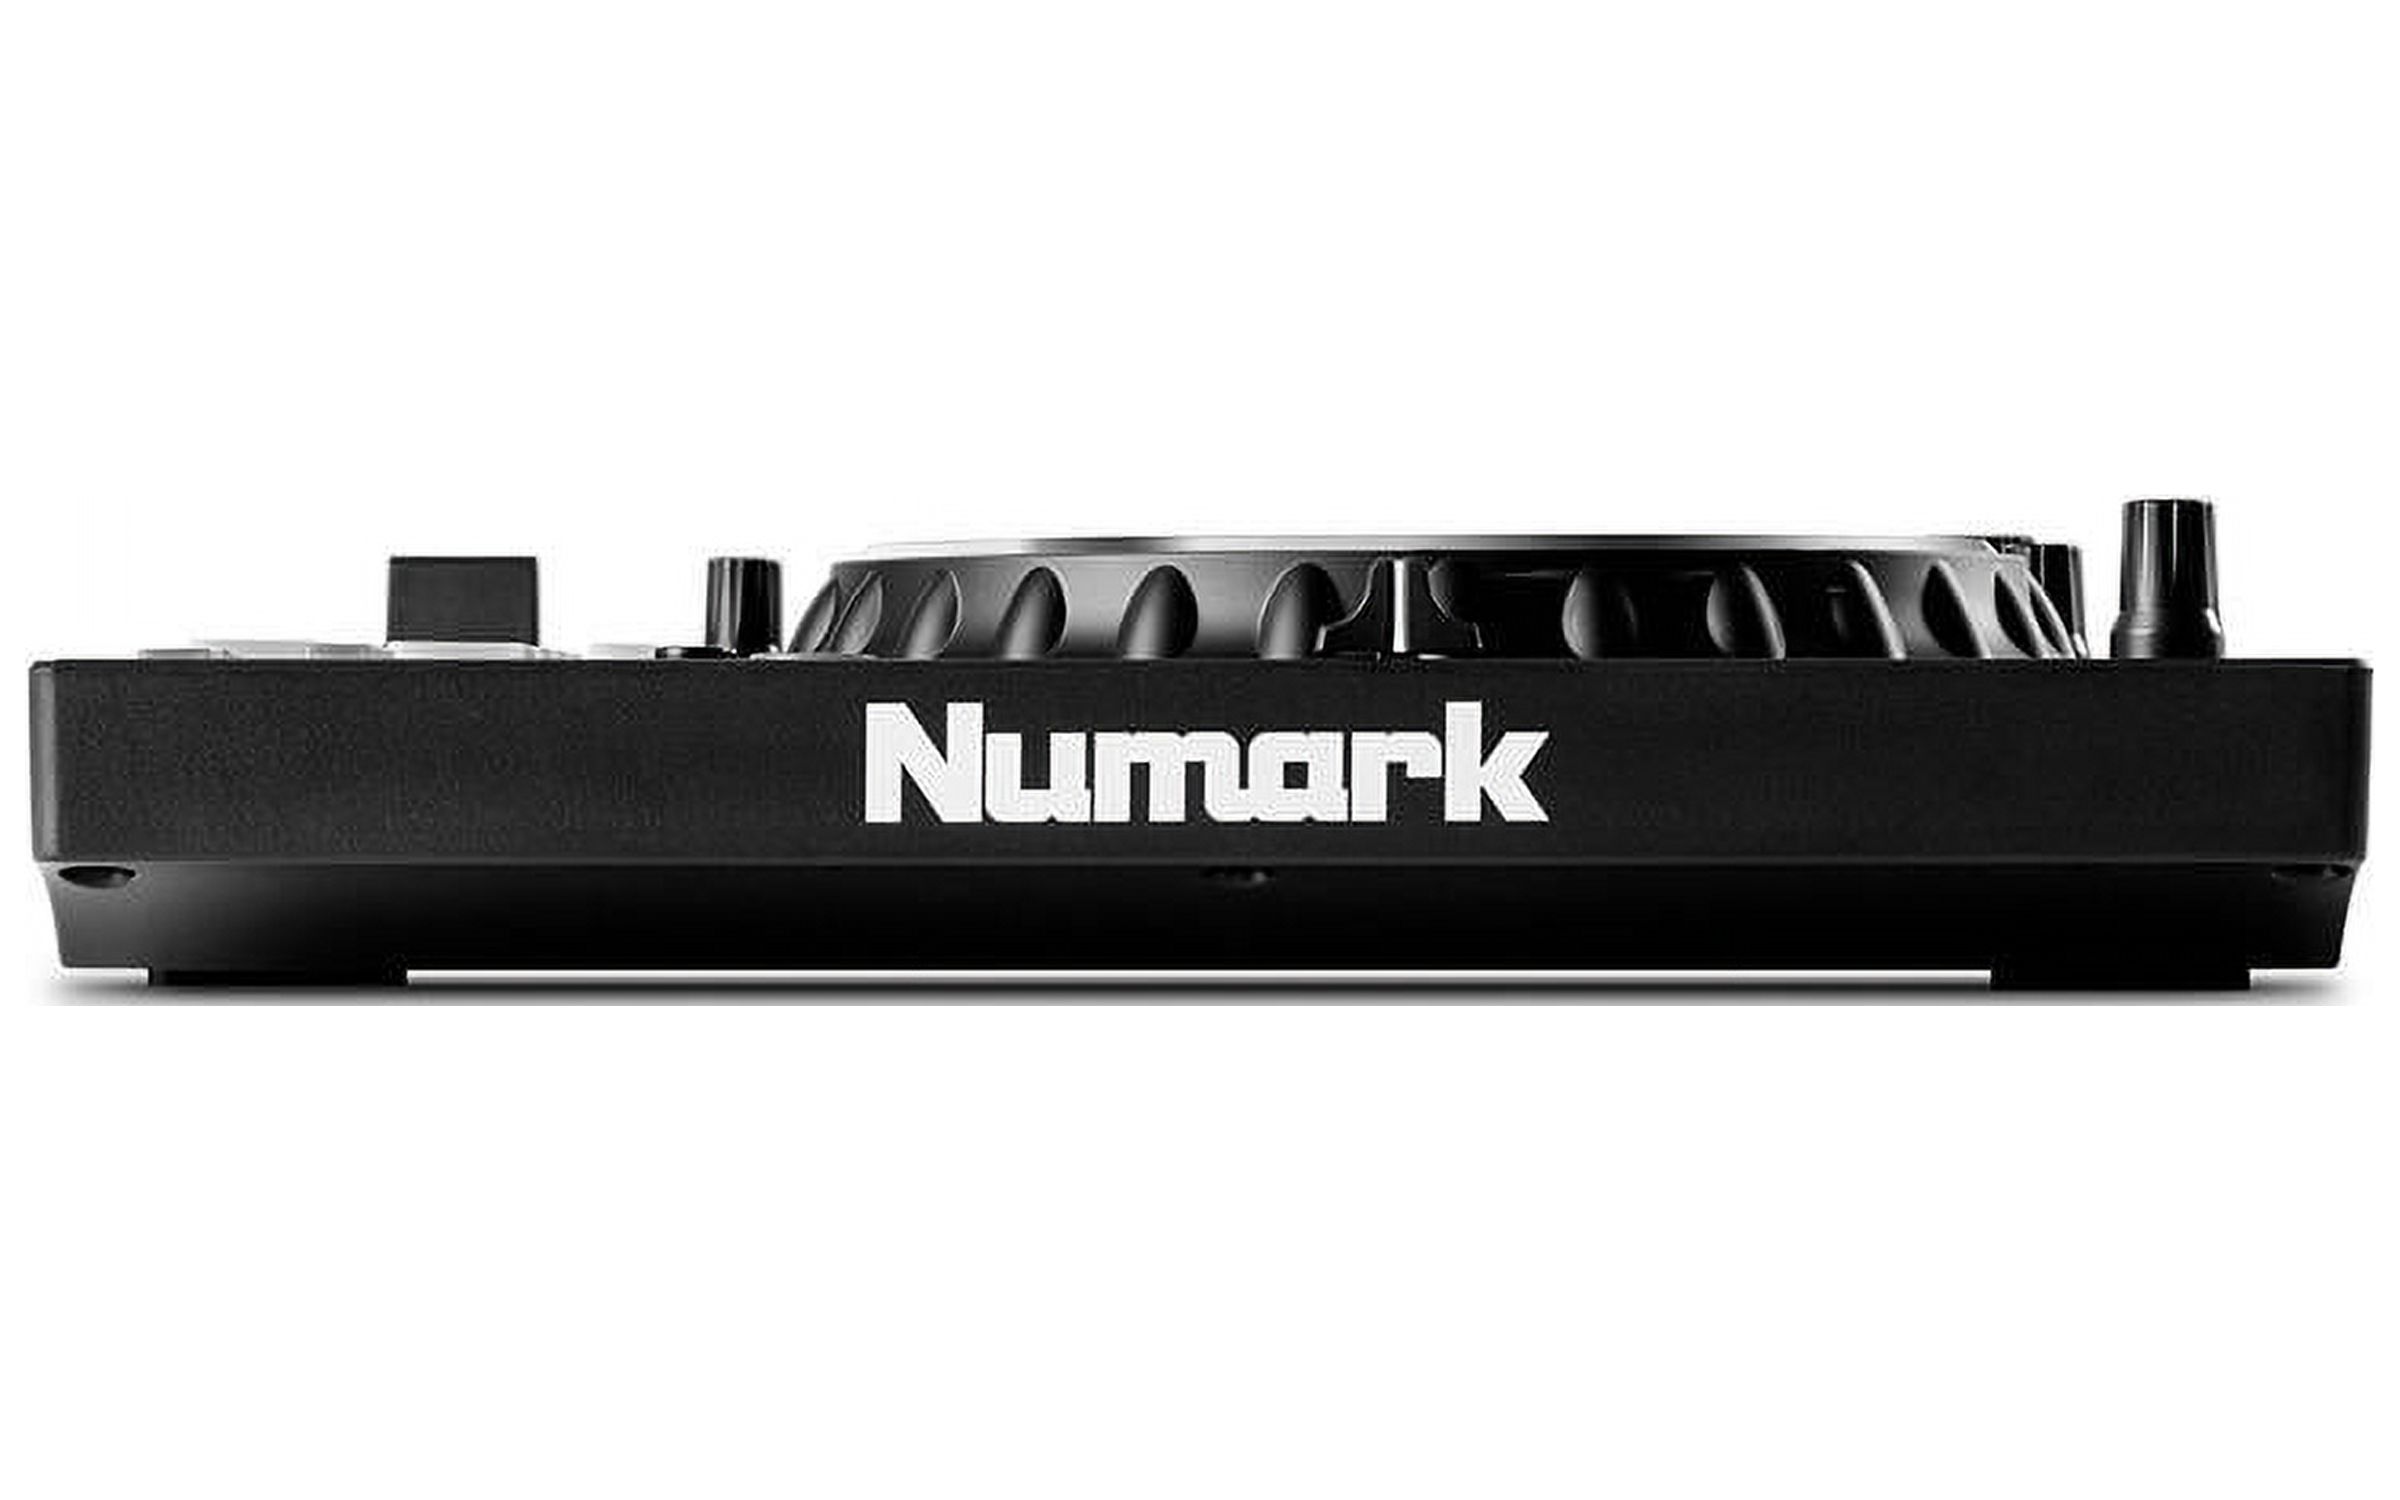 Numark Mixtrack Platinum FX - DJ Controller for Serato with 4 Deck Control, Mixer, Built-in Audio Interface, Jog Wheel Displays and Paddles - image 2 of 7